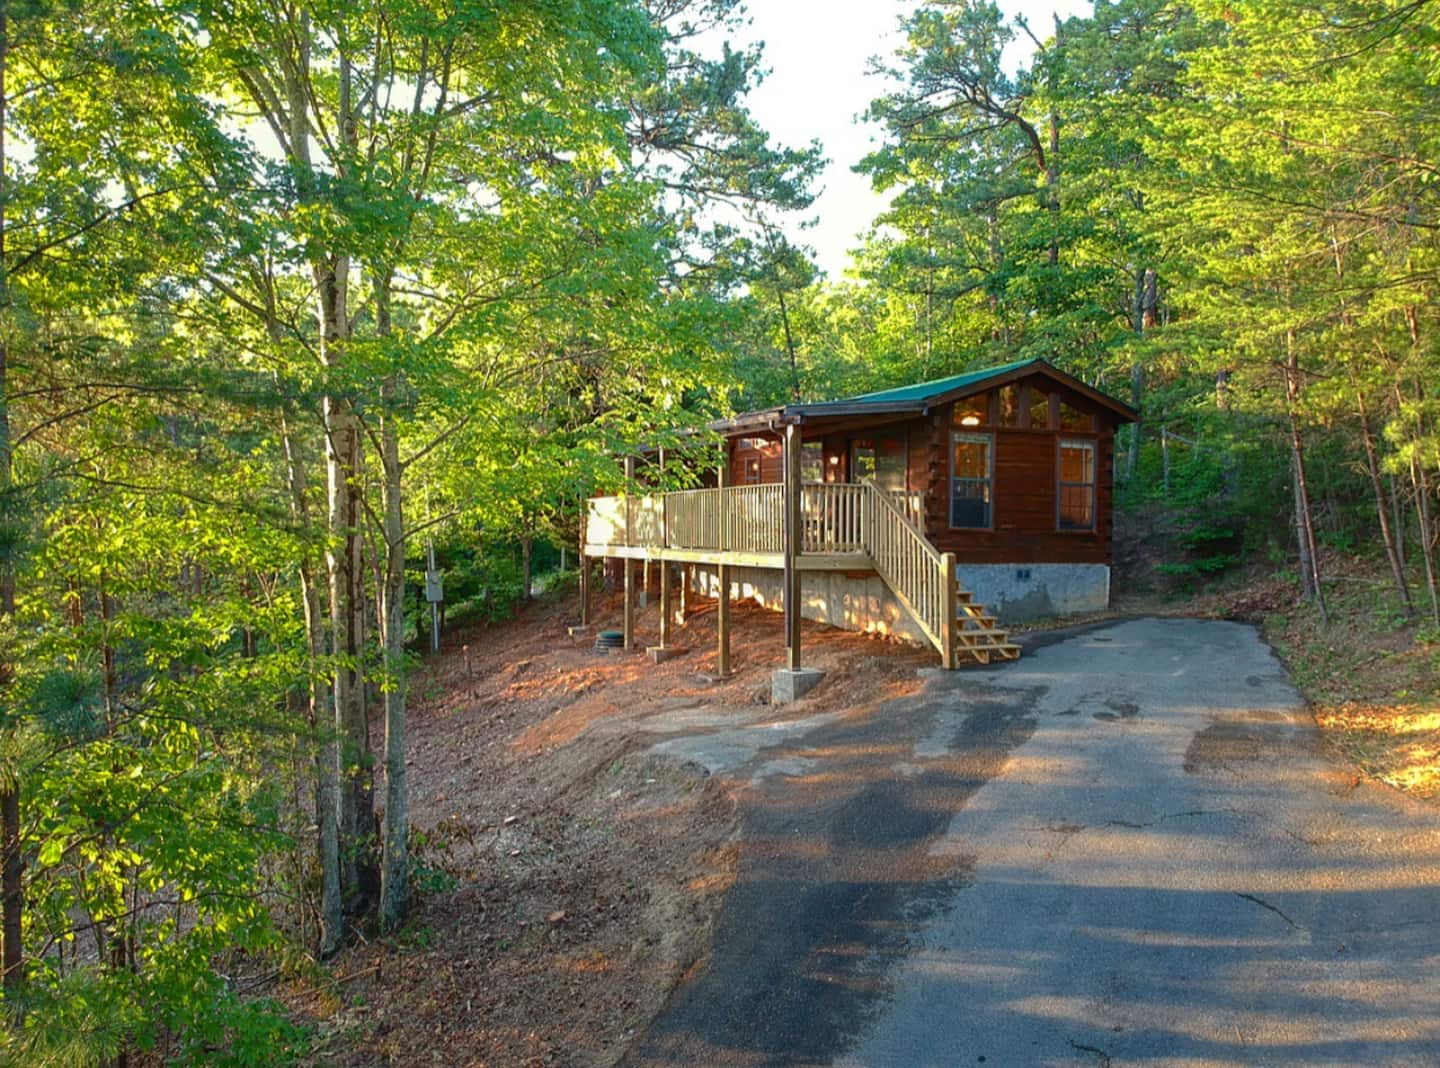 Buying an Airbnb Vacation Rental in the Smoky Mountains